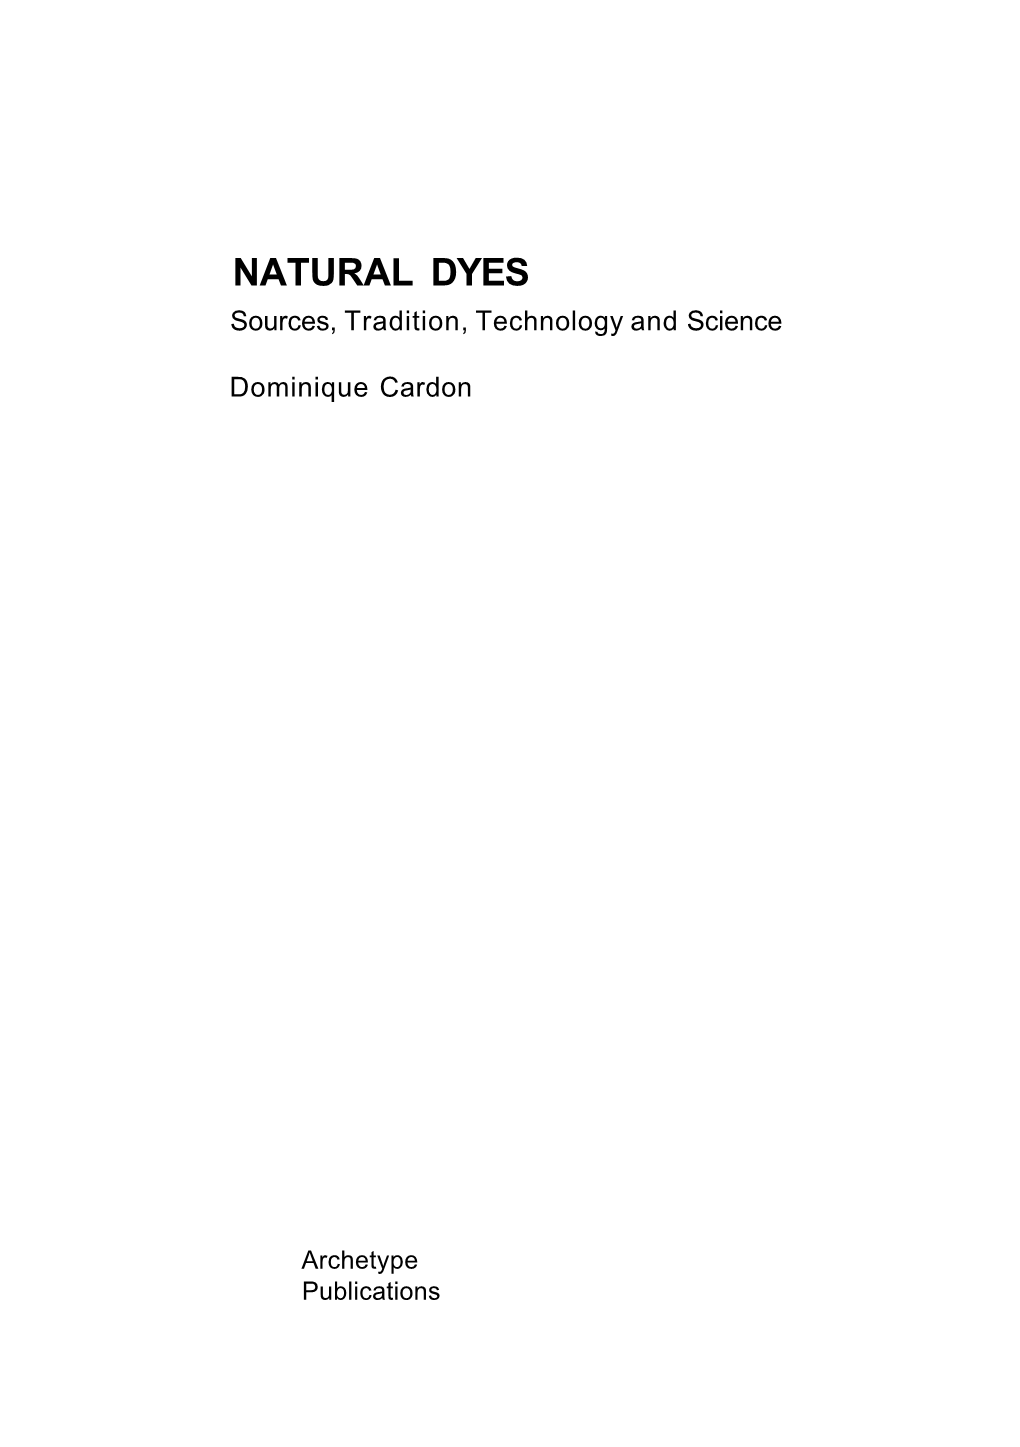 NATURAL DYES Sources, Tradition, Technology and Science